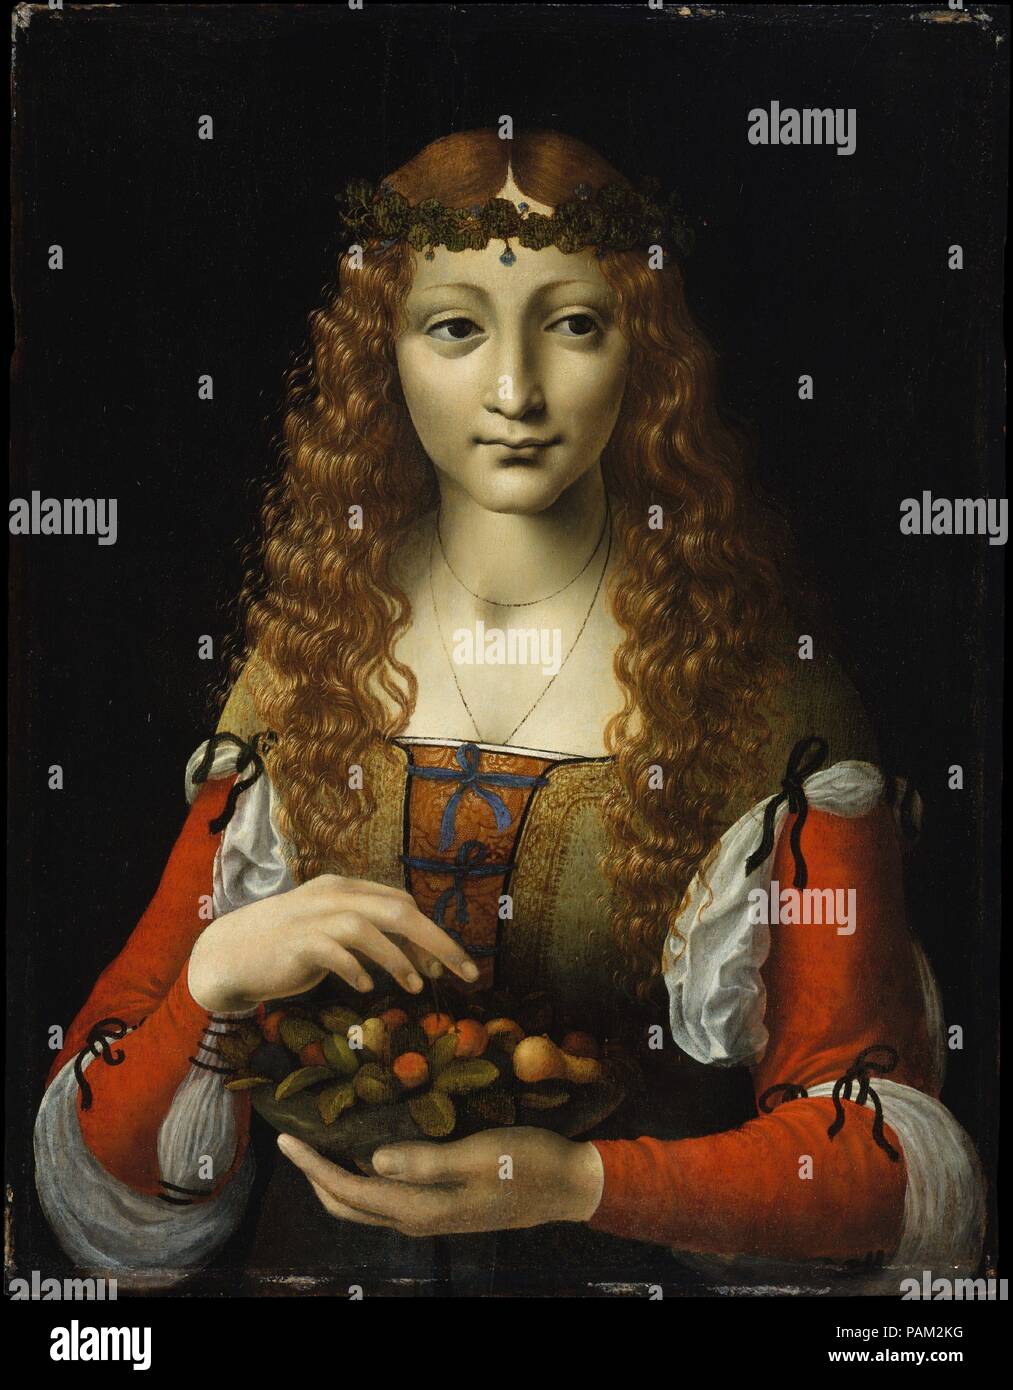 Girl with Cherries. Artist: Attributed to Giovanni Ambrogio de Predis (Italian, Milanese, active by 1472-died after 1508). Dimensions: 19 1/4 x 14 3/4 in. (48.9 x 37.5 cm). Date: ca. 1491-95.  Trained in Milan, Ambrogio de Predis was associated after 1483 with Leonardo da Vinci, with whom he collaborated. The careful study of the positions of the hands and the enigmatic, slight smile both come from Leonardo's example. The painting is sometimes thought to be by another of his followers, such as Giovanni Antonio Boltraffio. The lady wears a wreath of ground ivy, suggesting her connection with hu Stock Photo